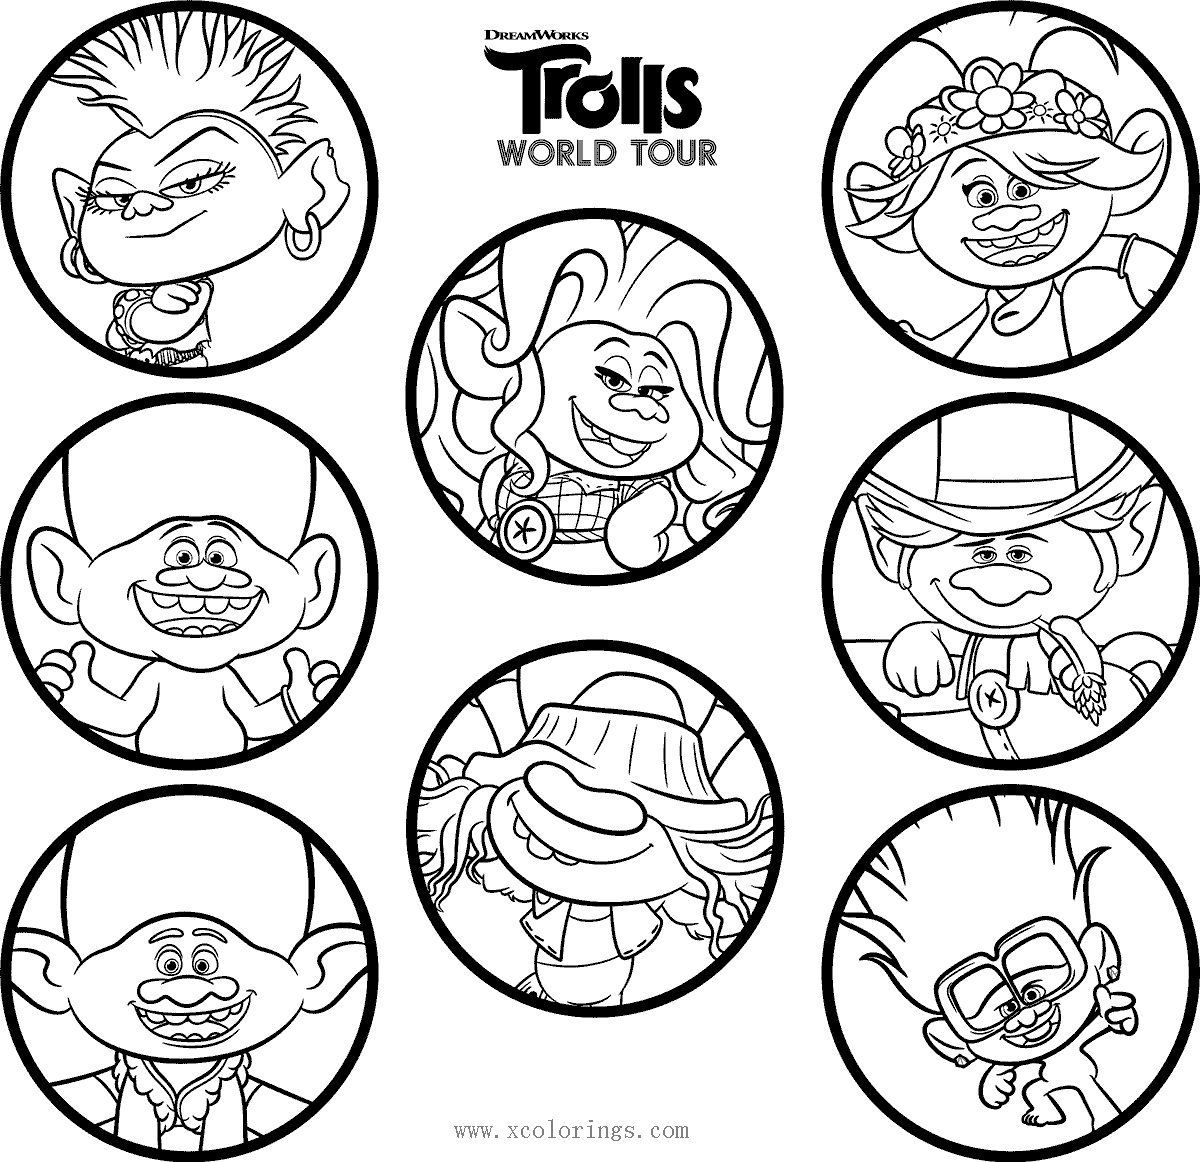 Free Trolls World Tour Coloring Pages Black and White printable